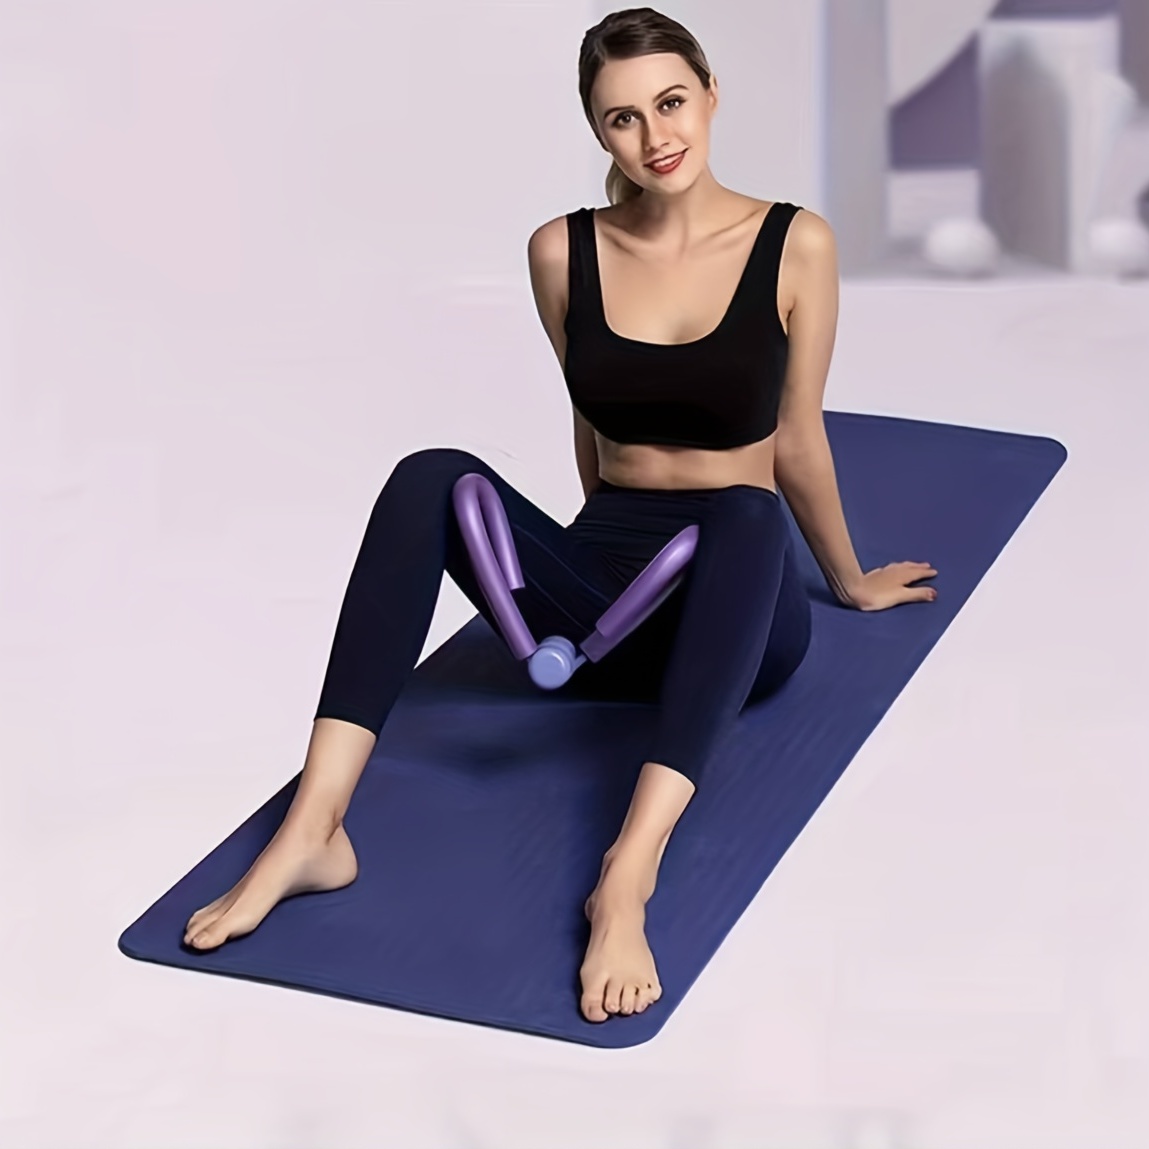 1/3 Inch Thick Exercise Workout Mat for Yoga Pilates Home Gym Yoga